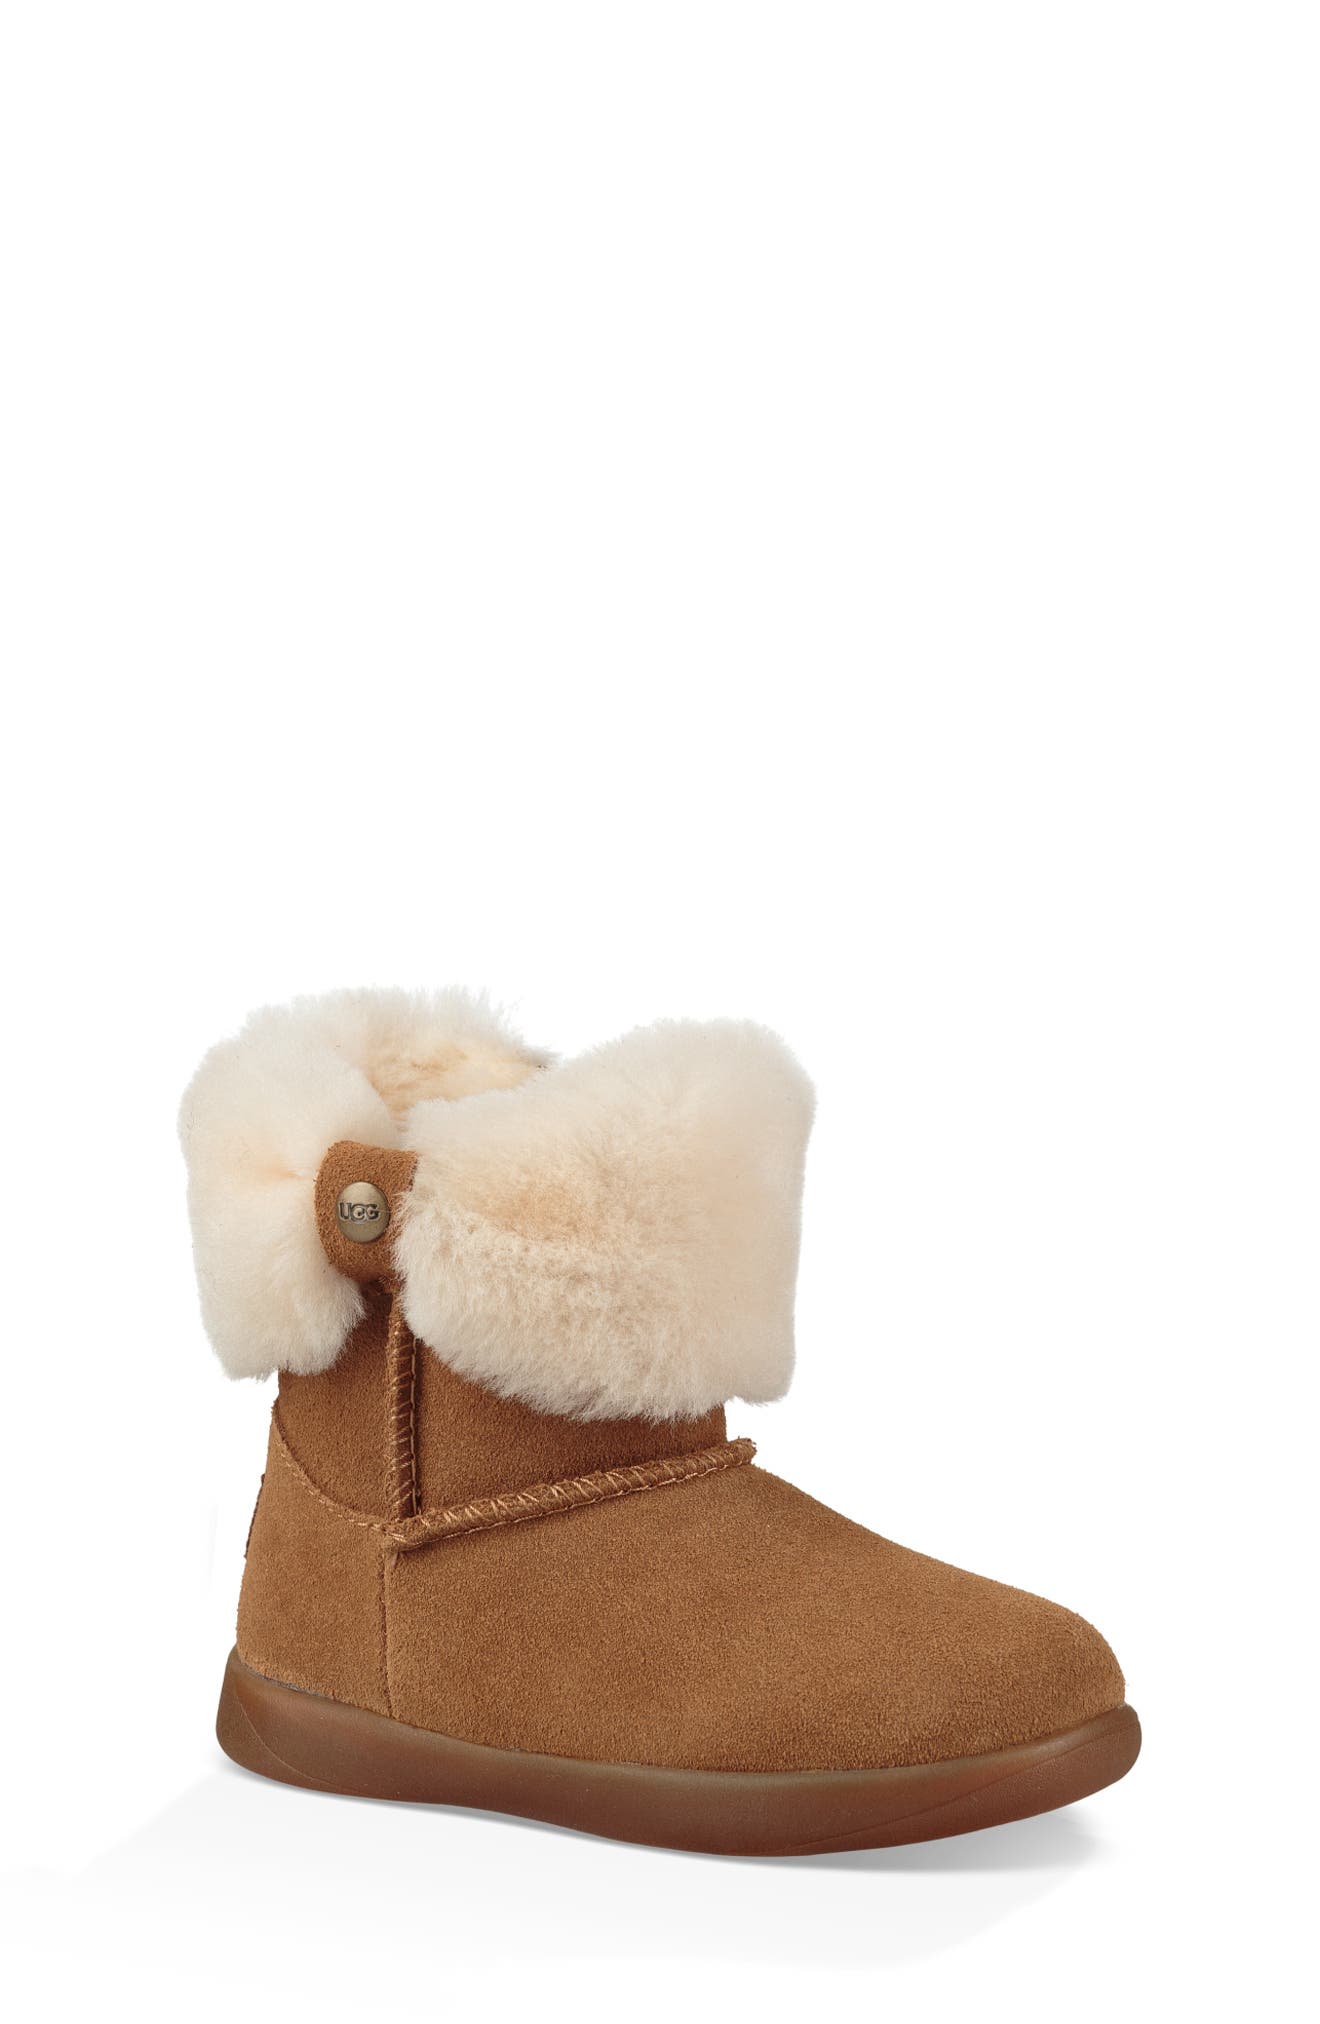 nordstrom boots uggs